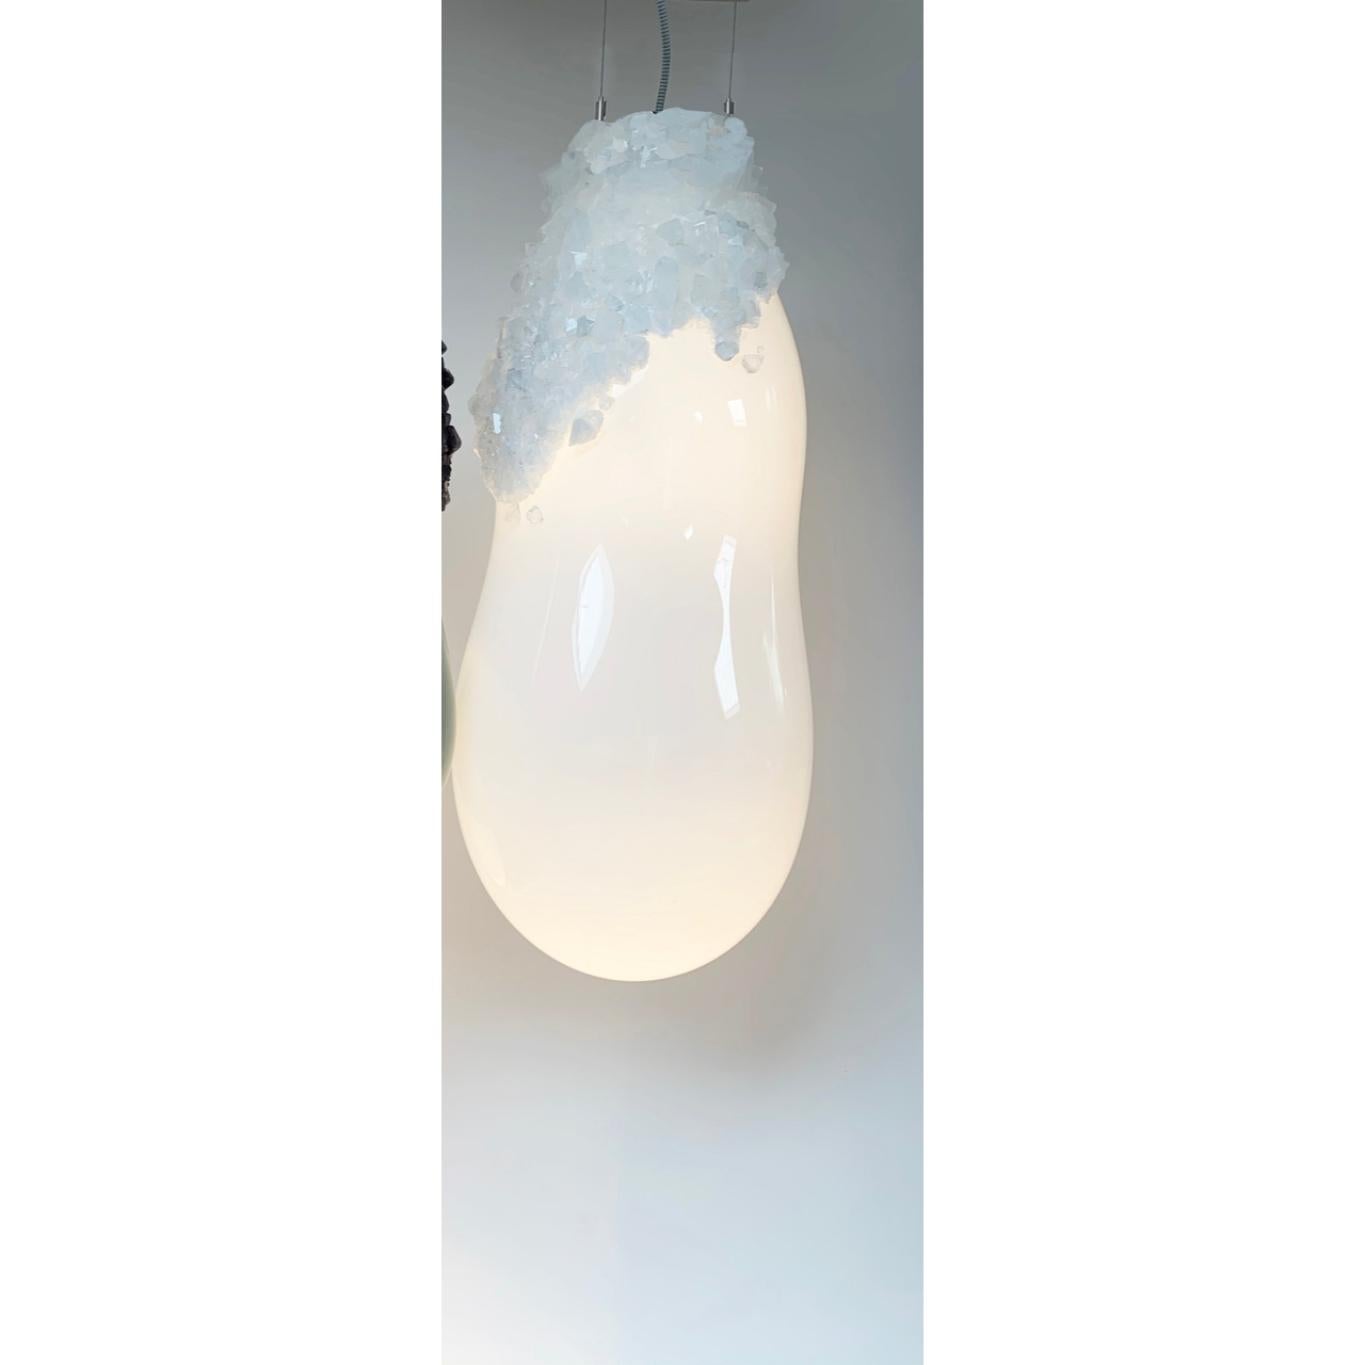 Large overgrown bubbles by Mark Sturkenboom and Alex de Witte
Dimensions: H 76 cm 
Material: Mouthblown glass, natural grown crystal, dimmable led, Colour White or grey black
Ceiling ornaments can be produced in crystal to extend the Overgrown